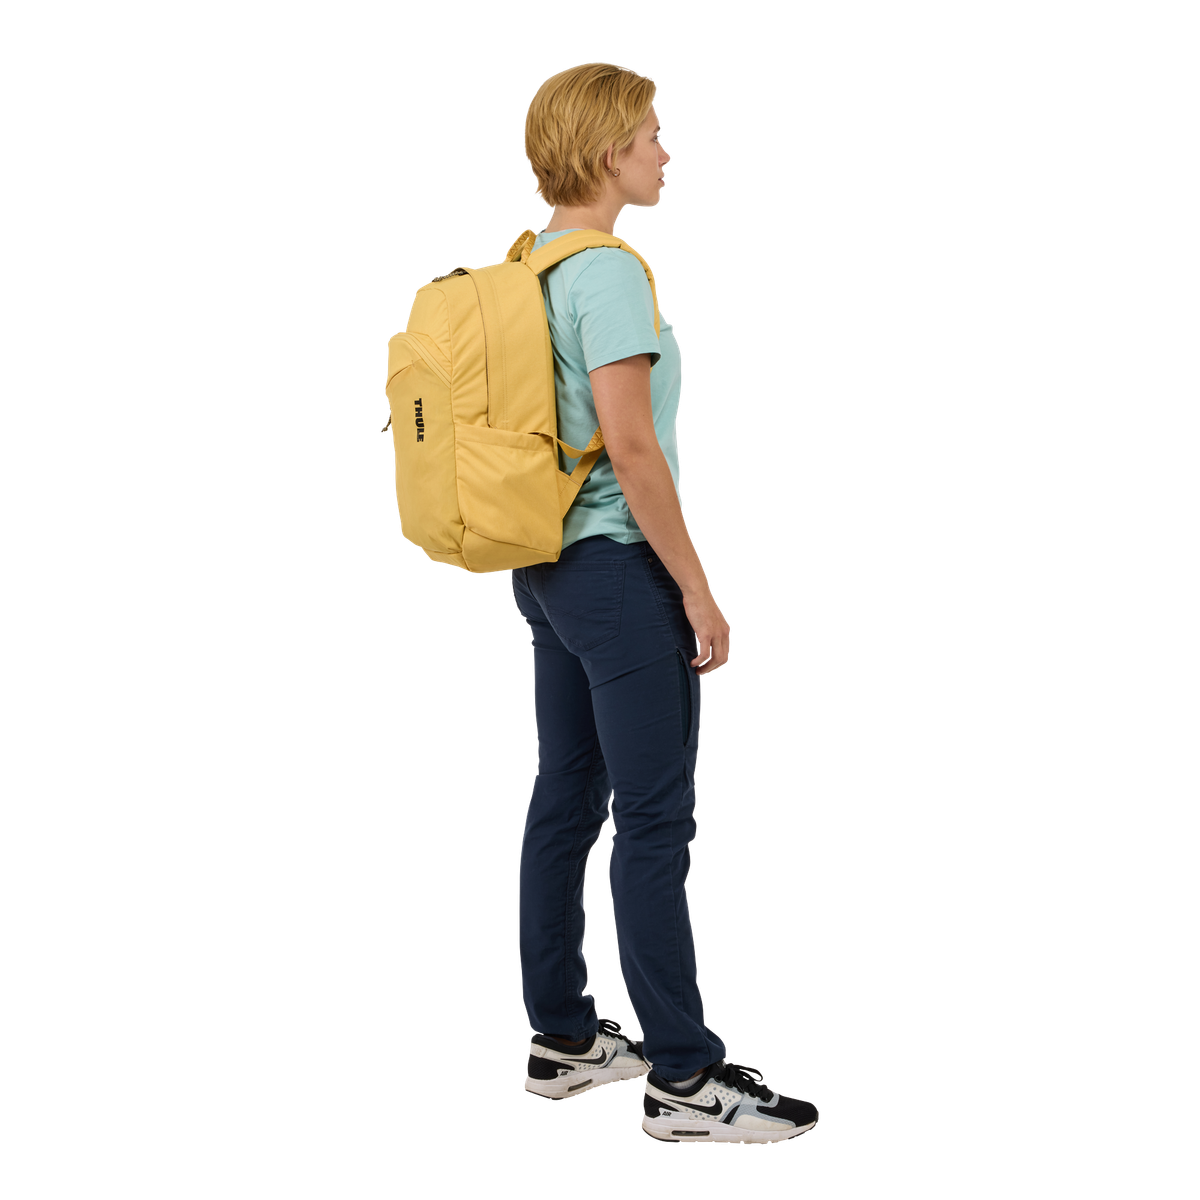 Thule Indago backpack 23L ochre yellow